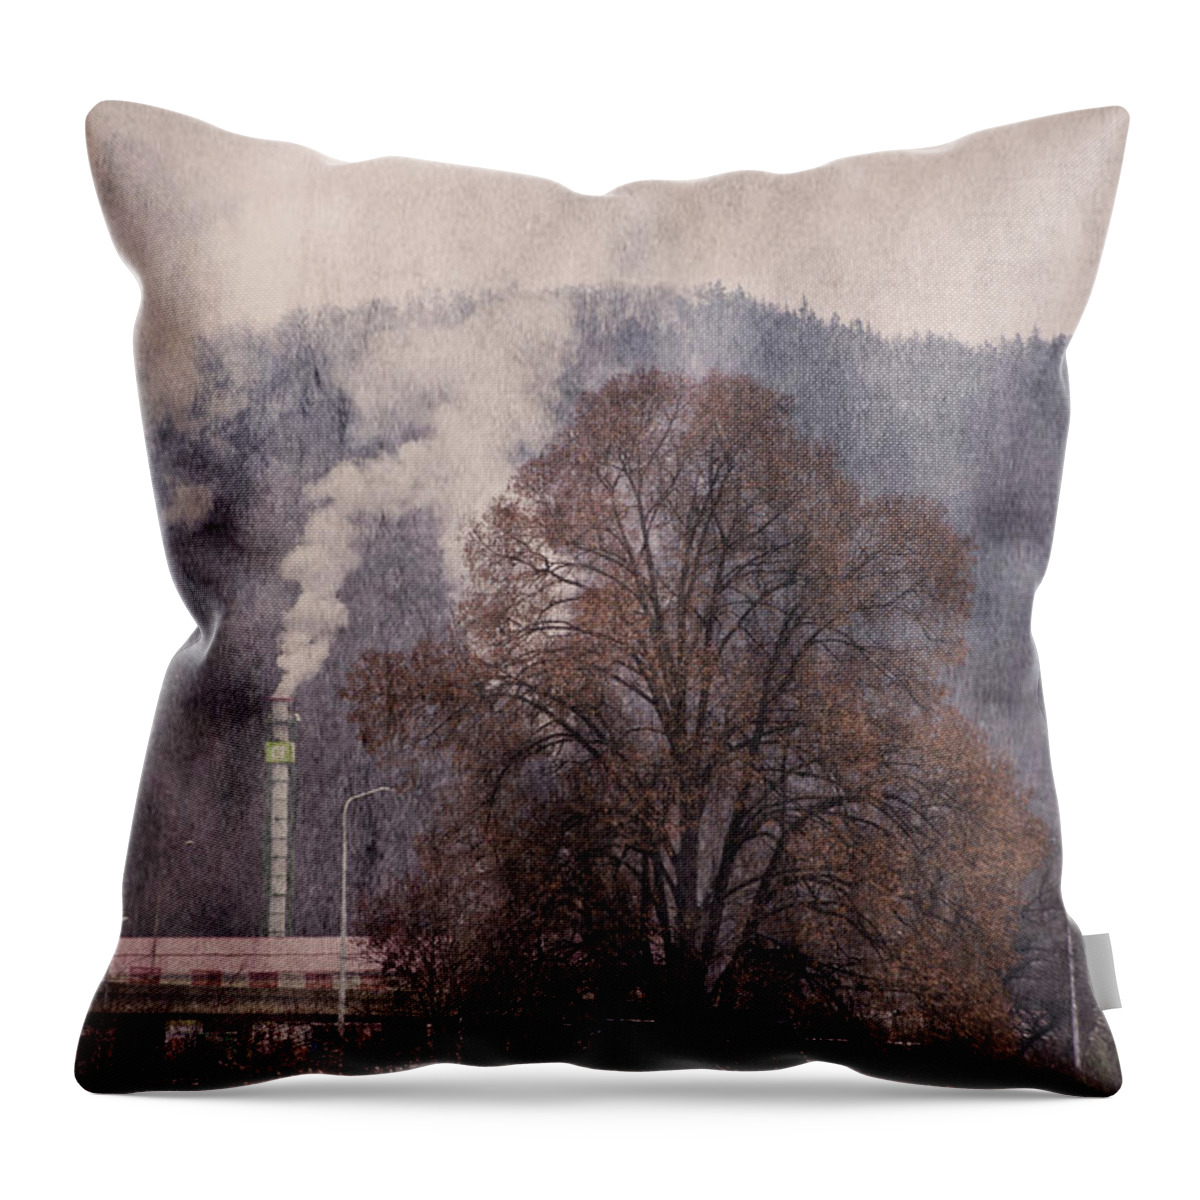 Pollution Throw Pillow featuring the photograph Pollution v2 by Alex Art